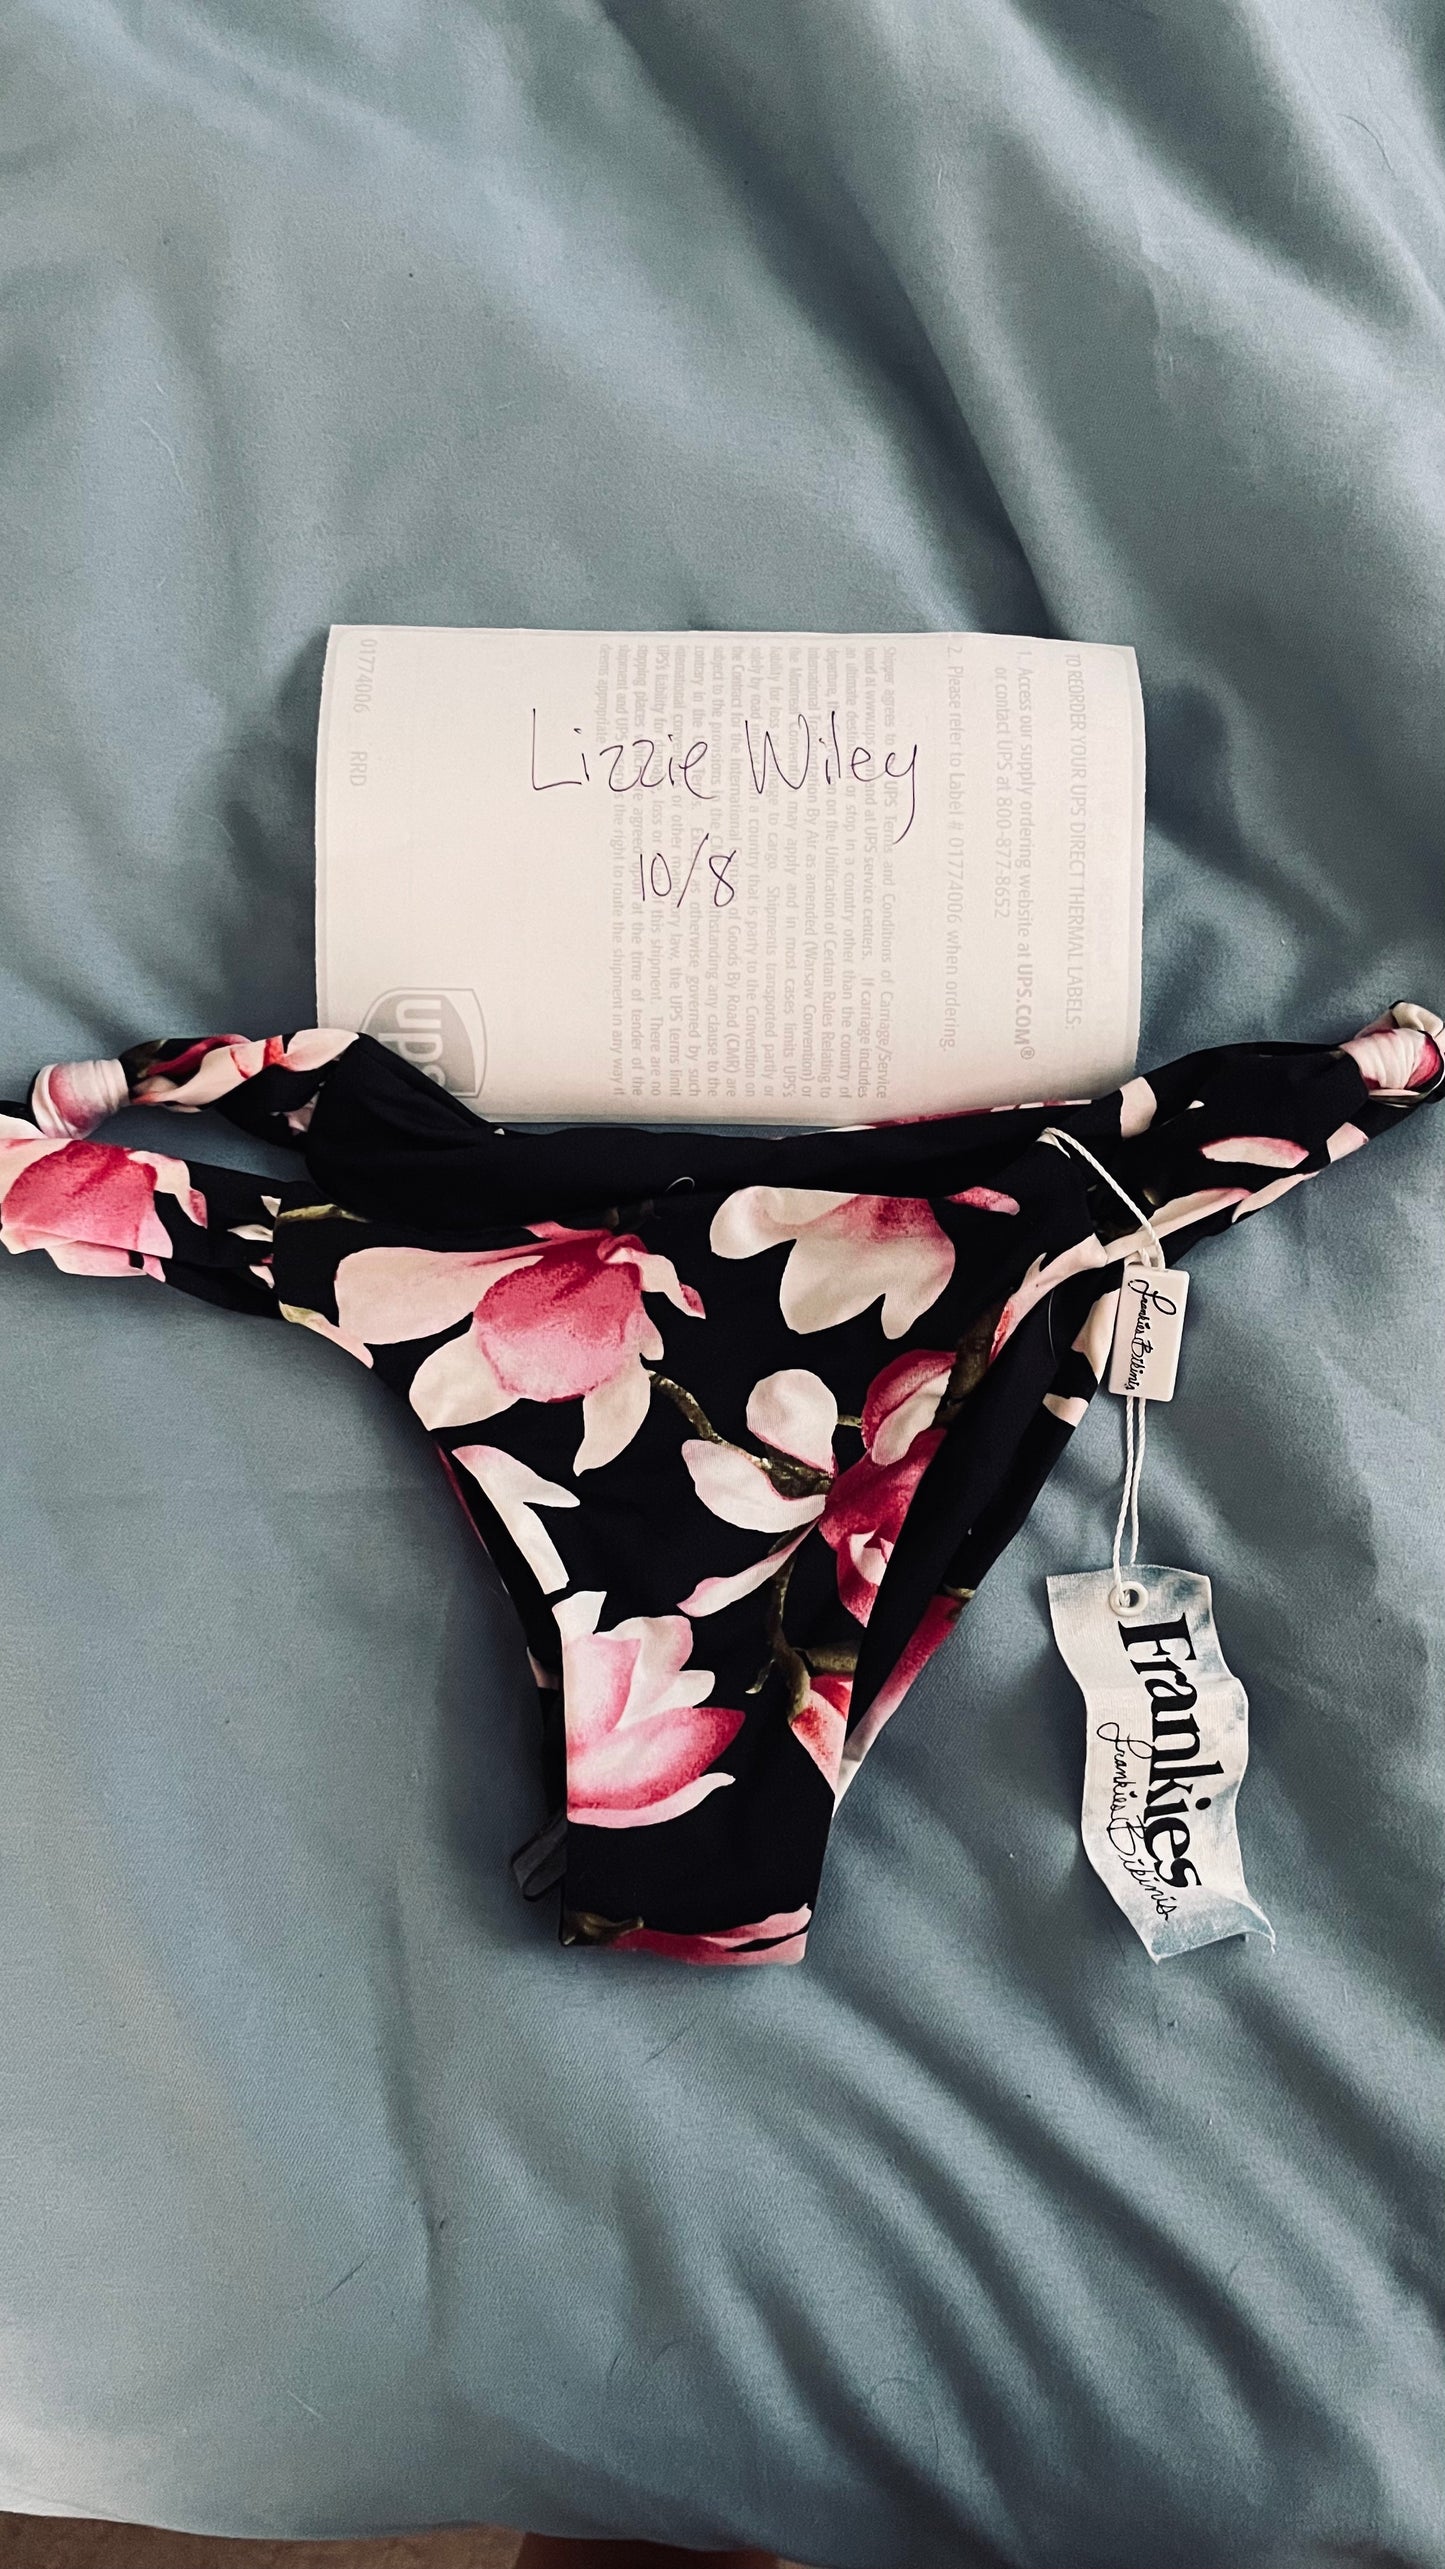 Black and pink foral bikini suit